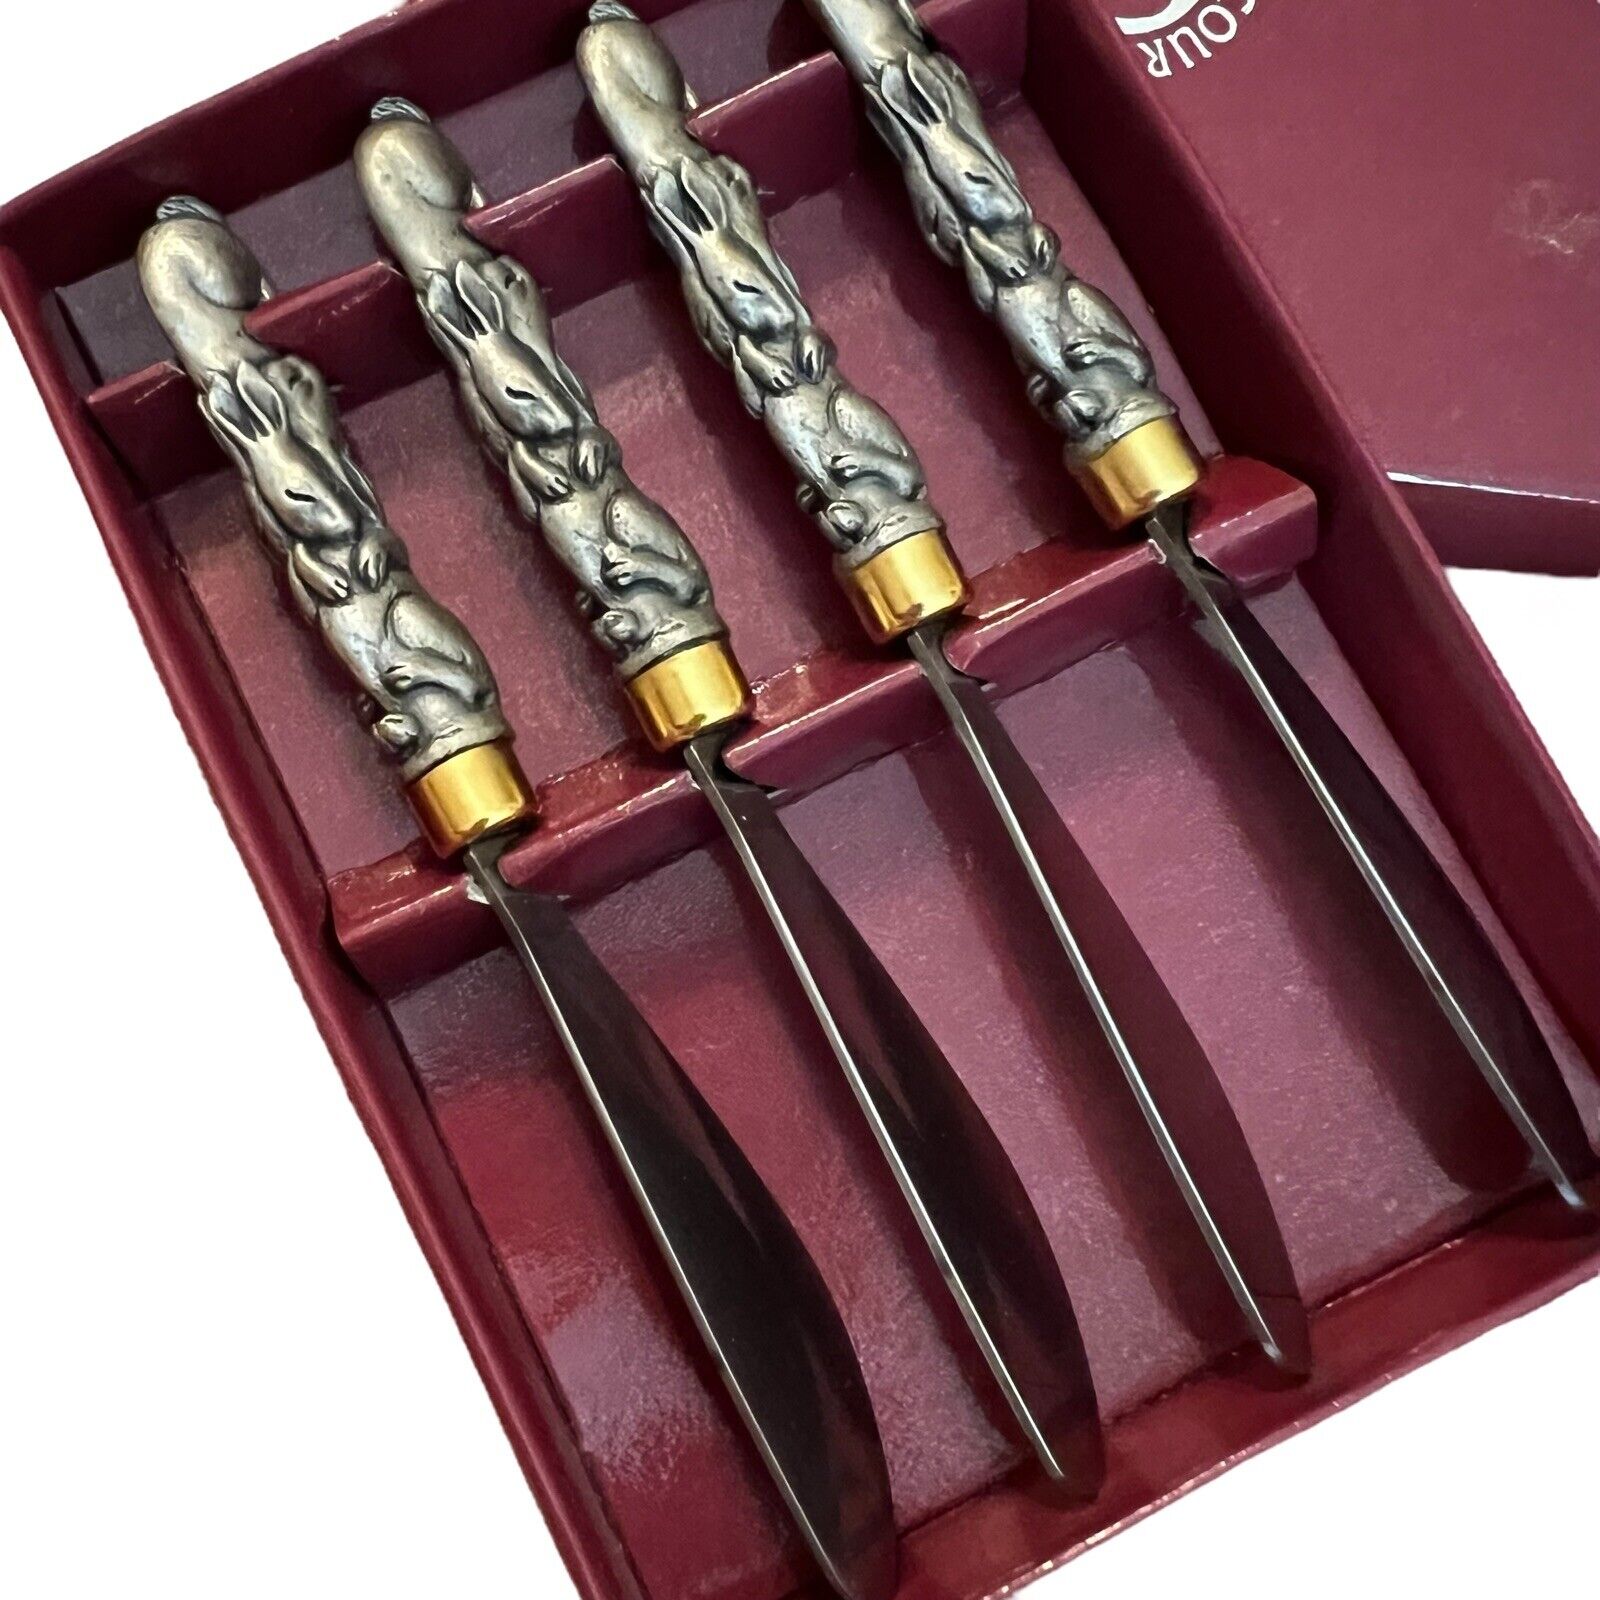 Set (4) ARTHUR COURT BUNNY RABBITS Snuggling Spreaders Butter Knives Silver Tone